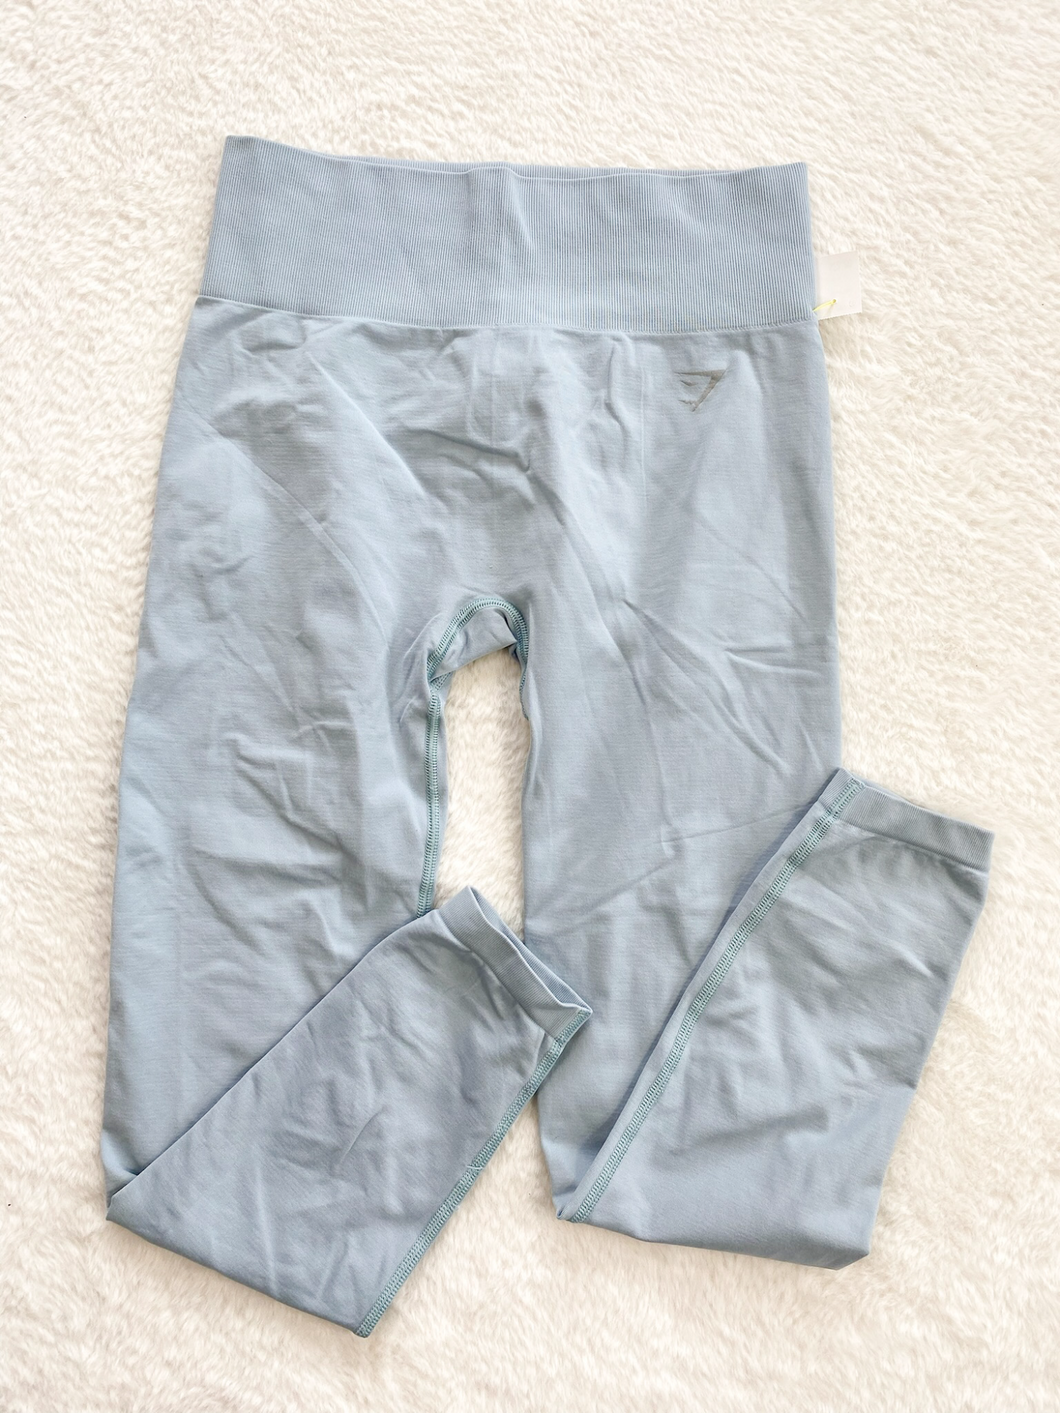 Gym Shark Athletic Pants Size Small P0208